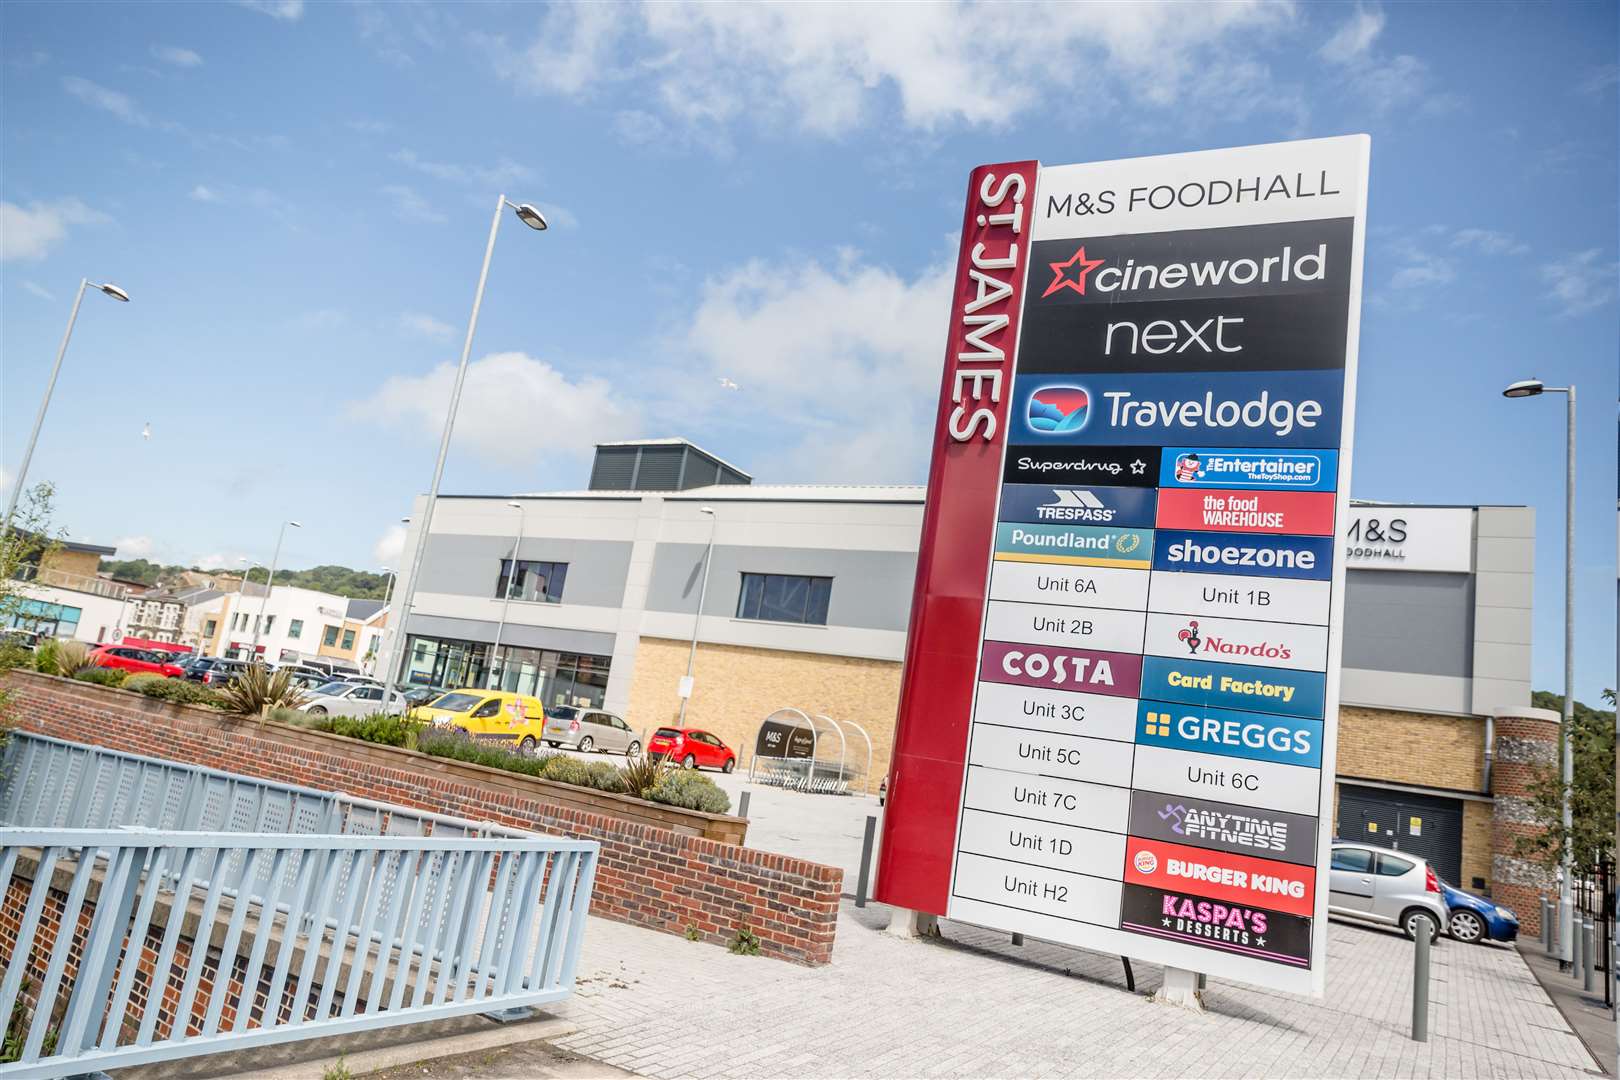 St James' has a Christmas family day this weekend. Picture: St James' Retail and Leisure Park